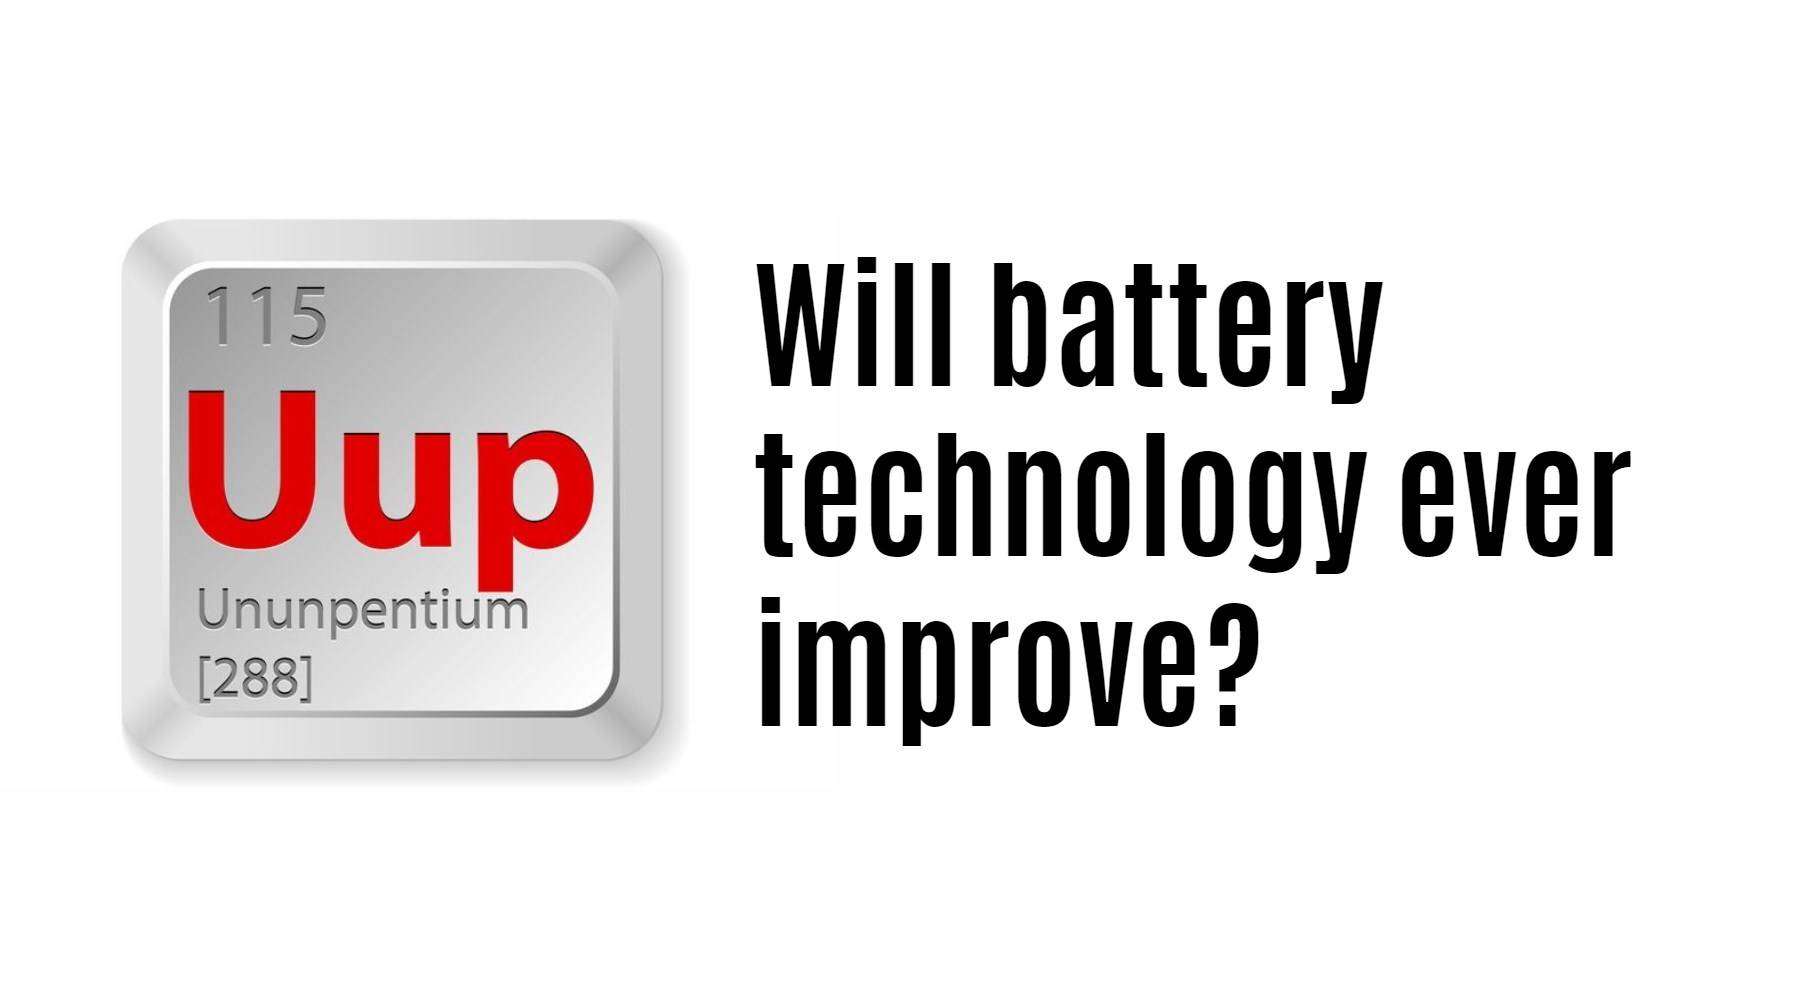 Will battery technology ever improve?